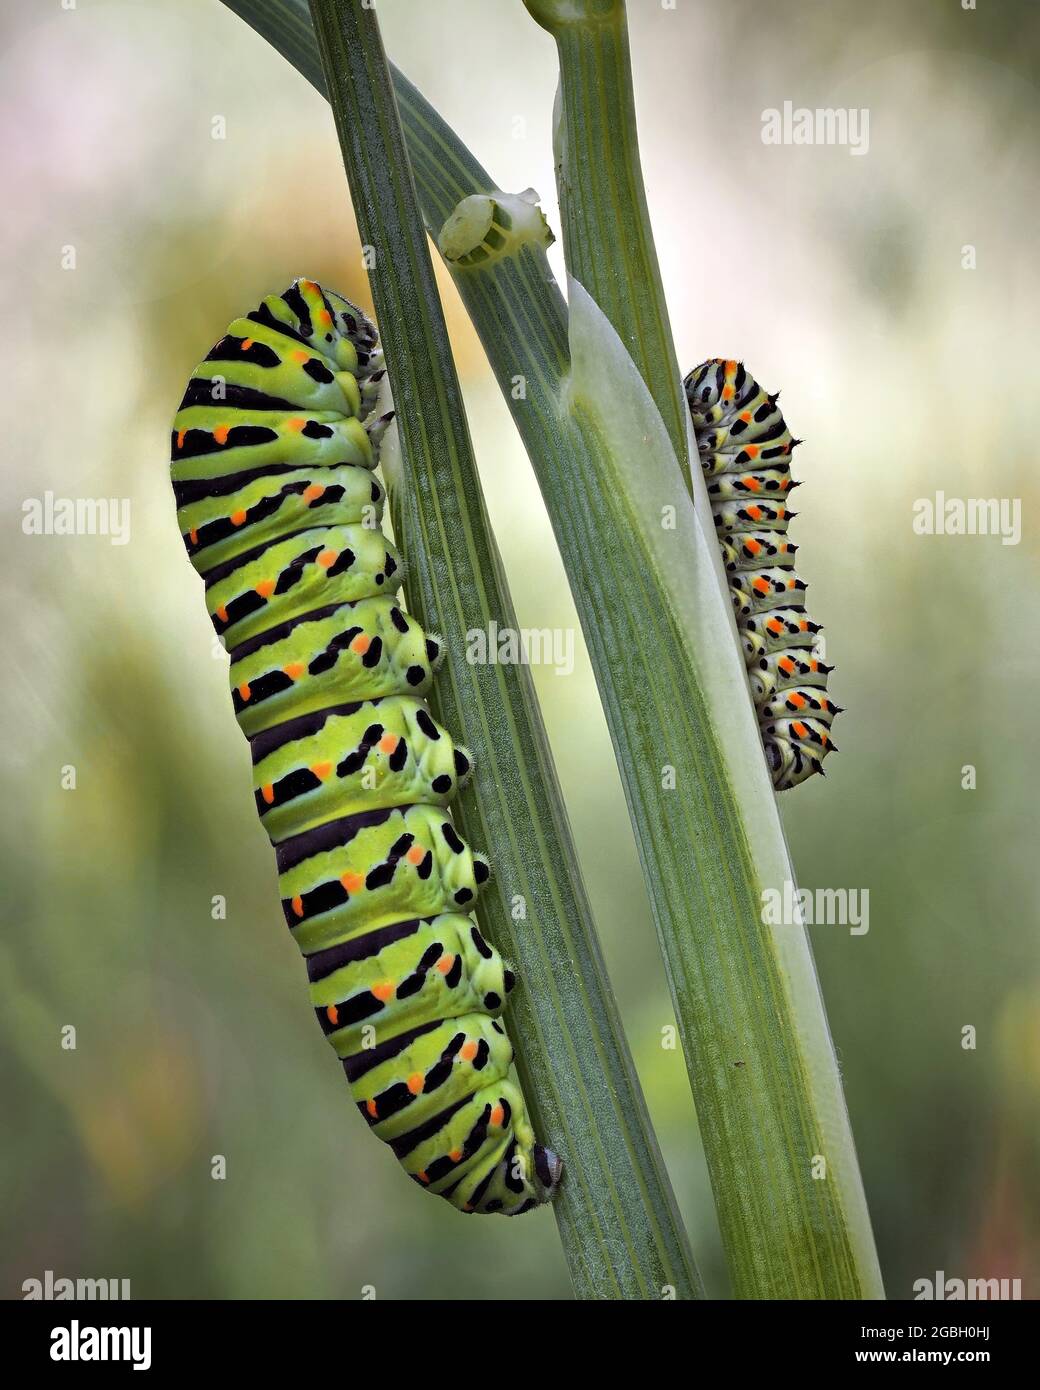 Selective closeup of green caterpillars on green leaves Stock Photo